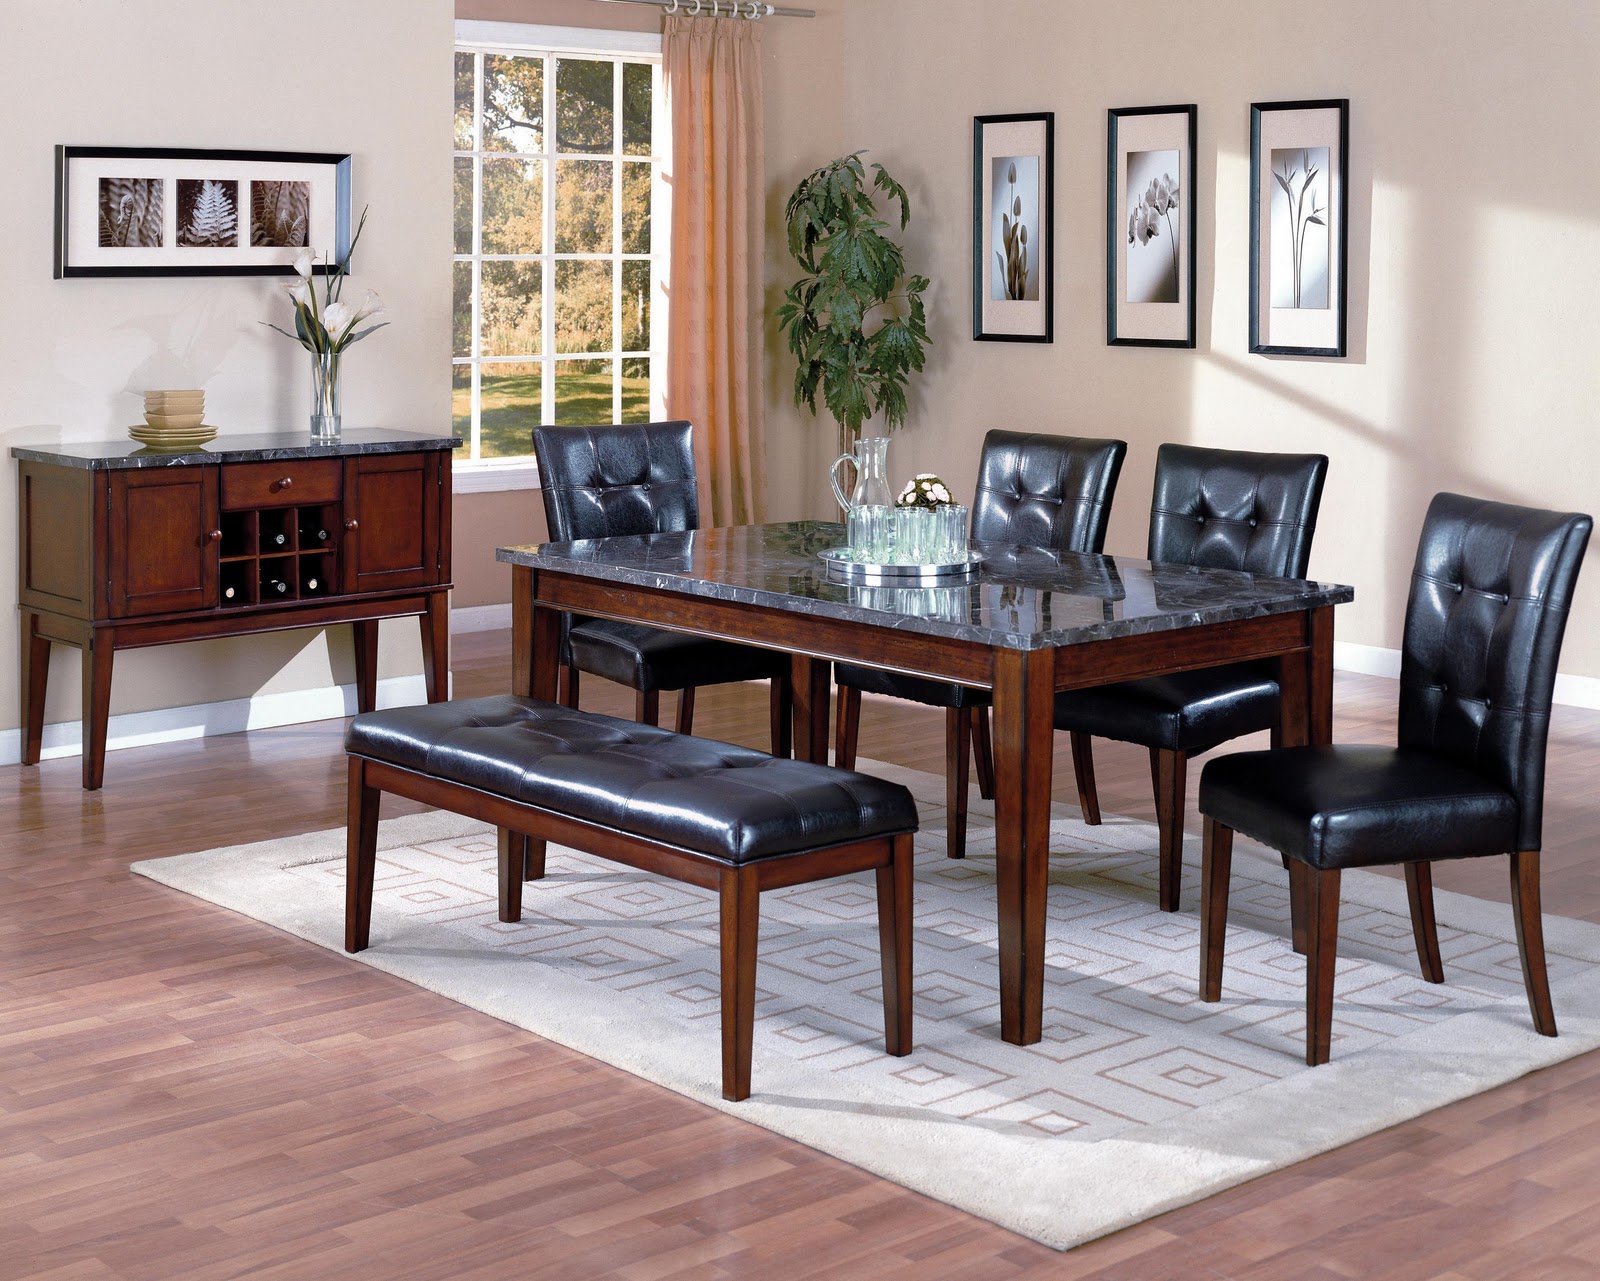 Dining Room Furniture Sets Clearance